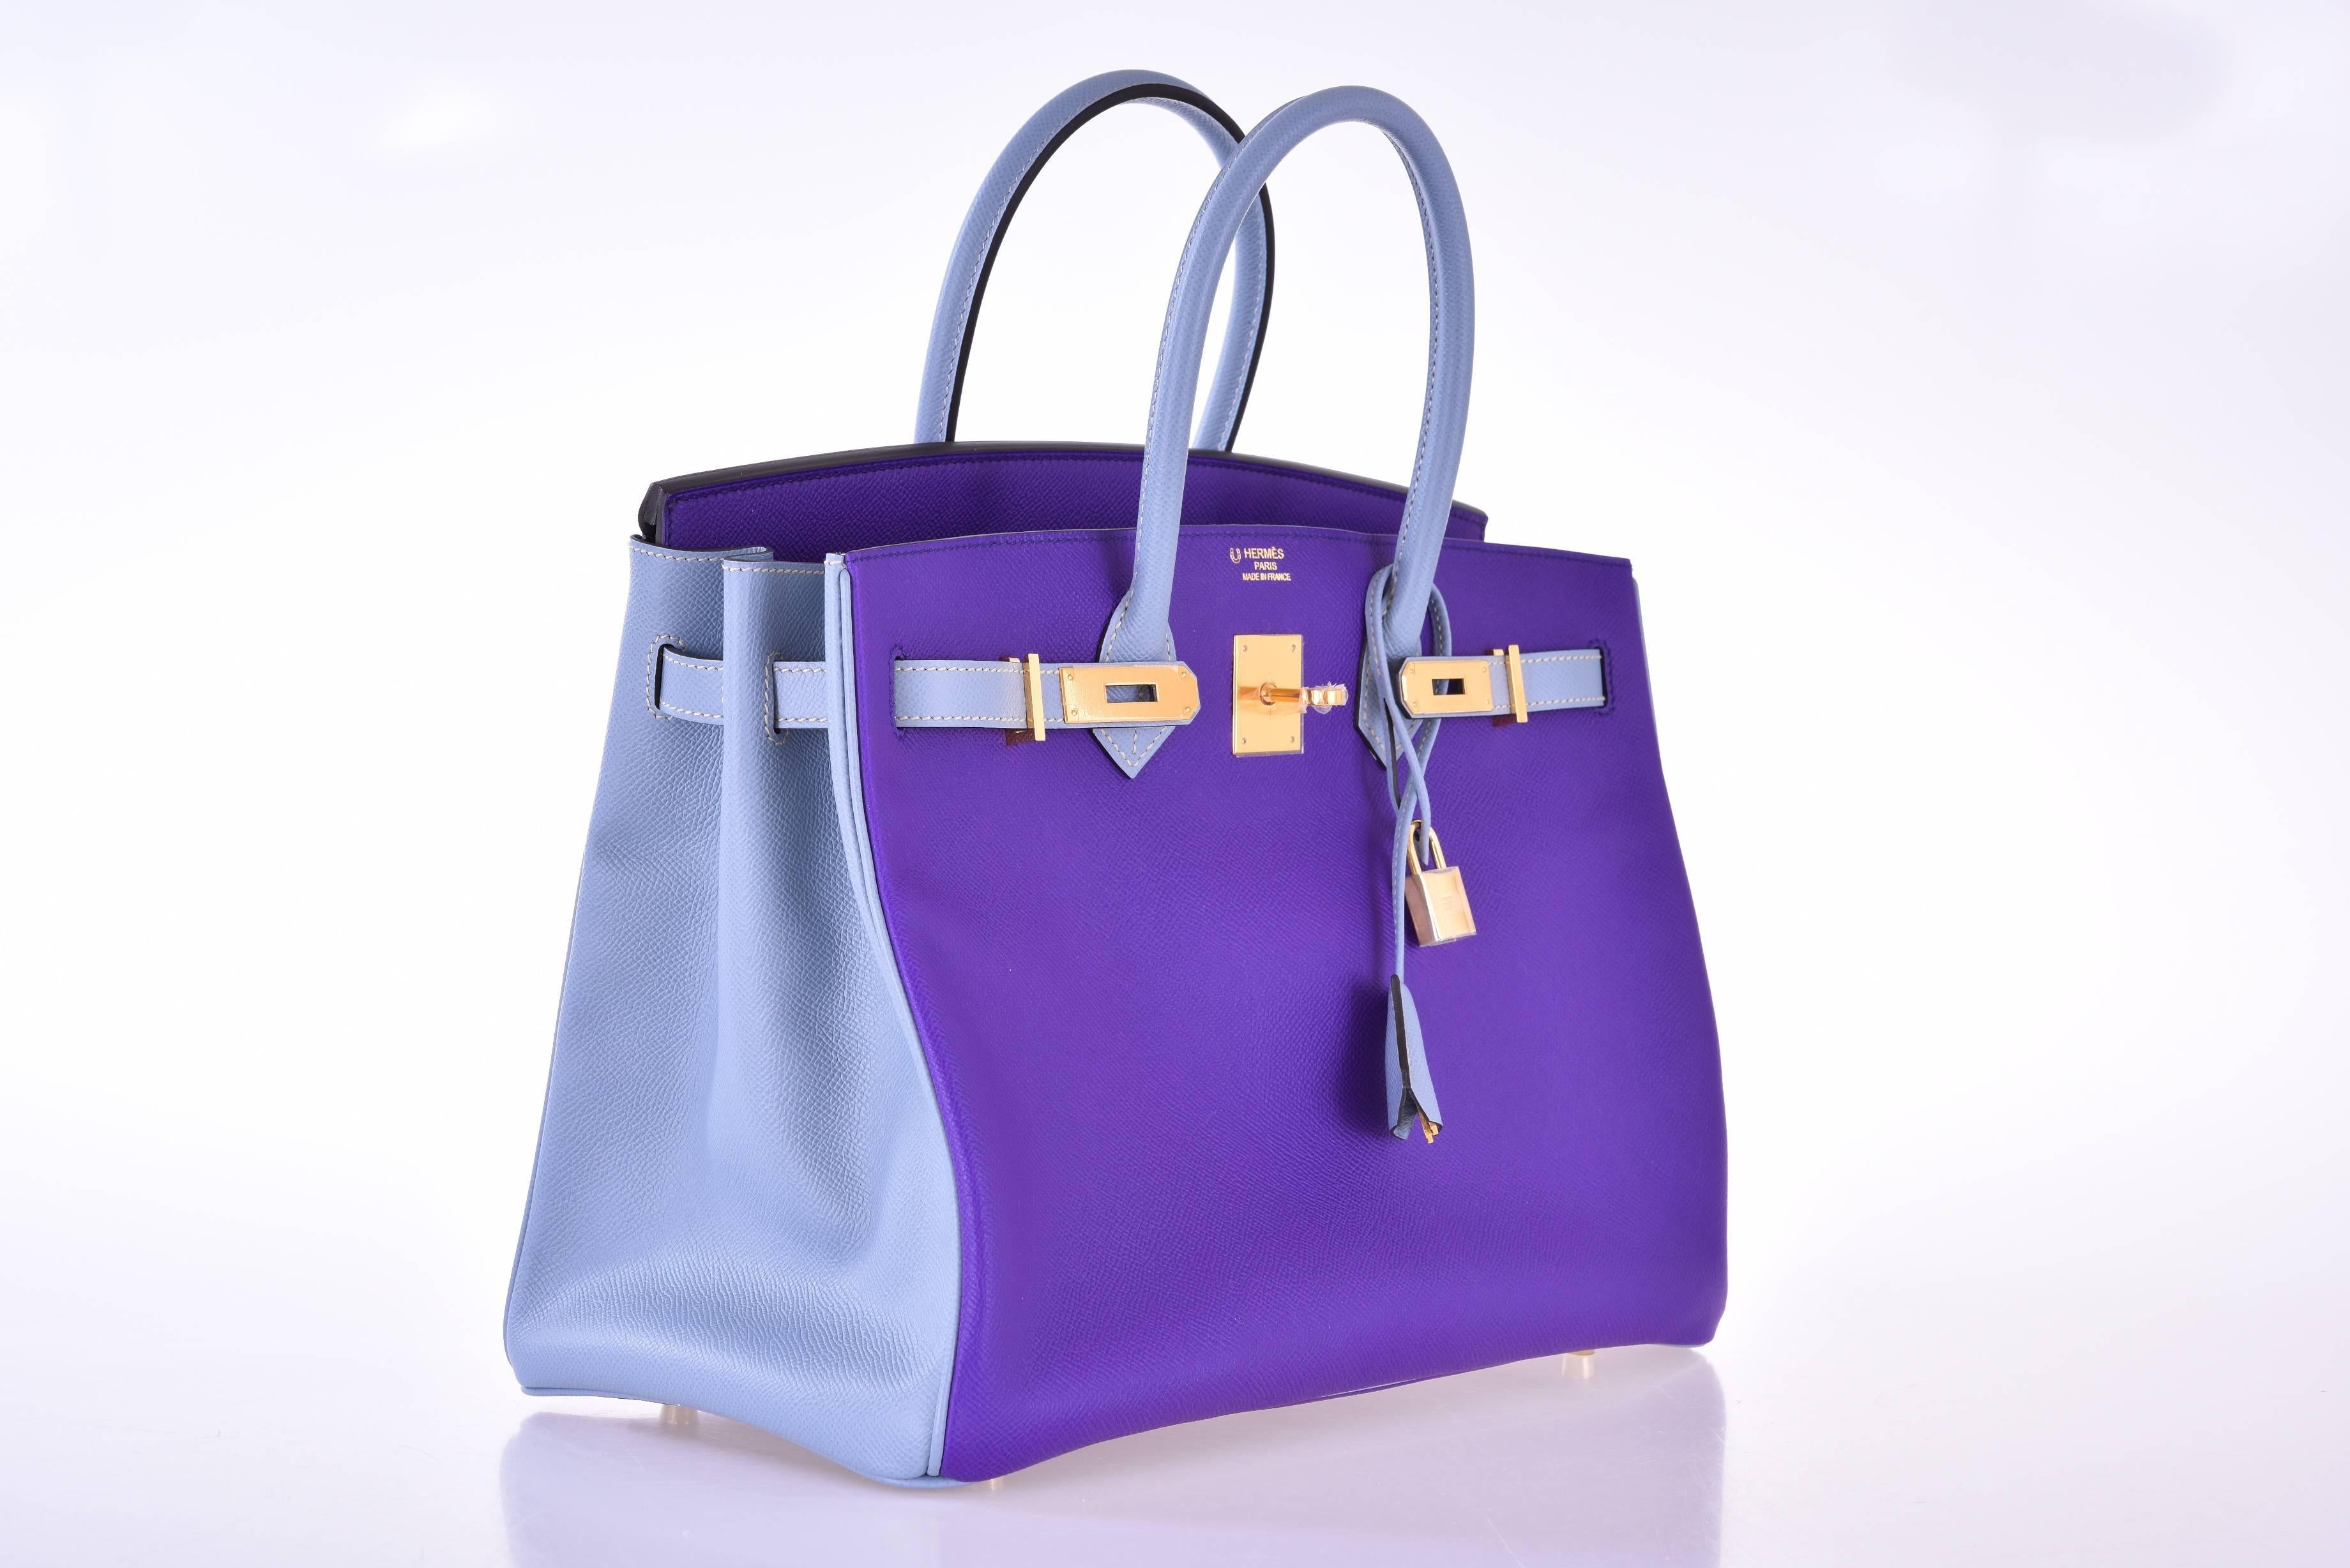 Very Special HSS Crocus with Blue lin combination with insane gold hardware

New Condition

This Hermes Crocus and blue Lin Birkin 35cm in EPSOM leather with gold  hardware is one of a kind.

This bag was a special order for a VIP client.